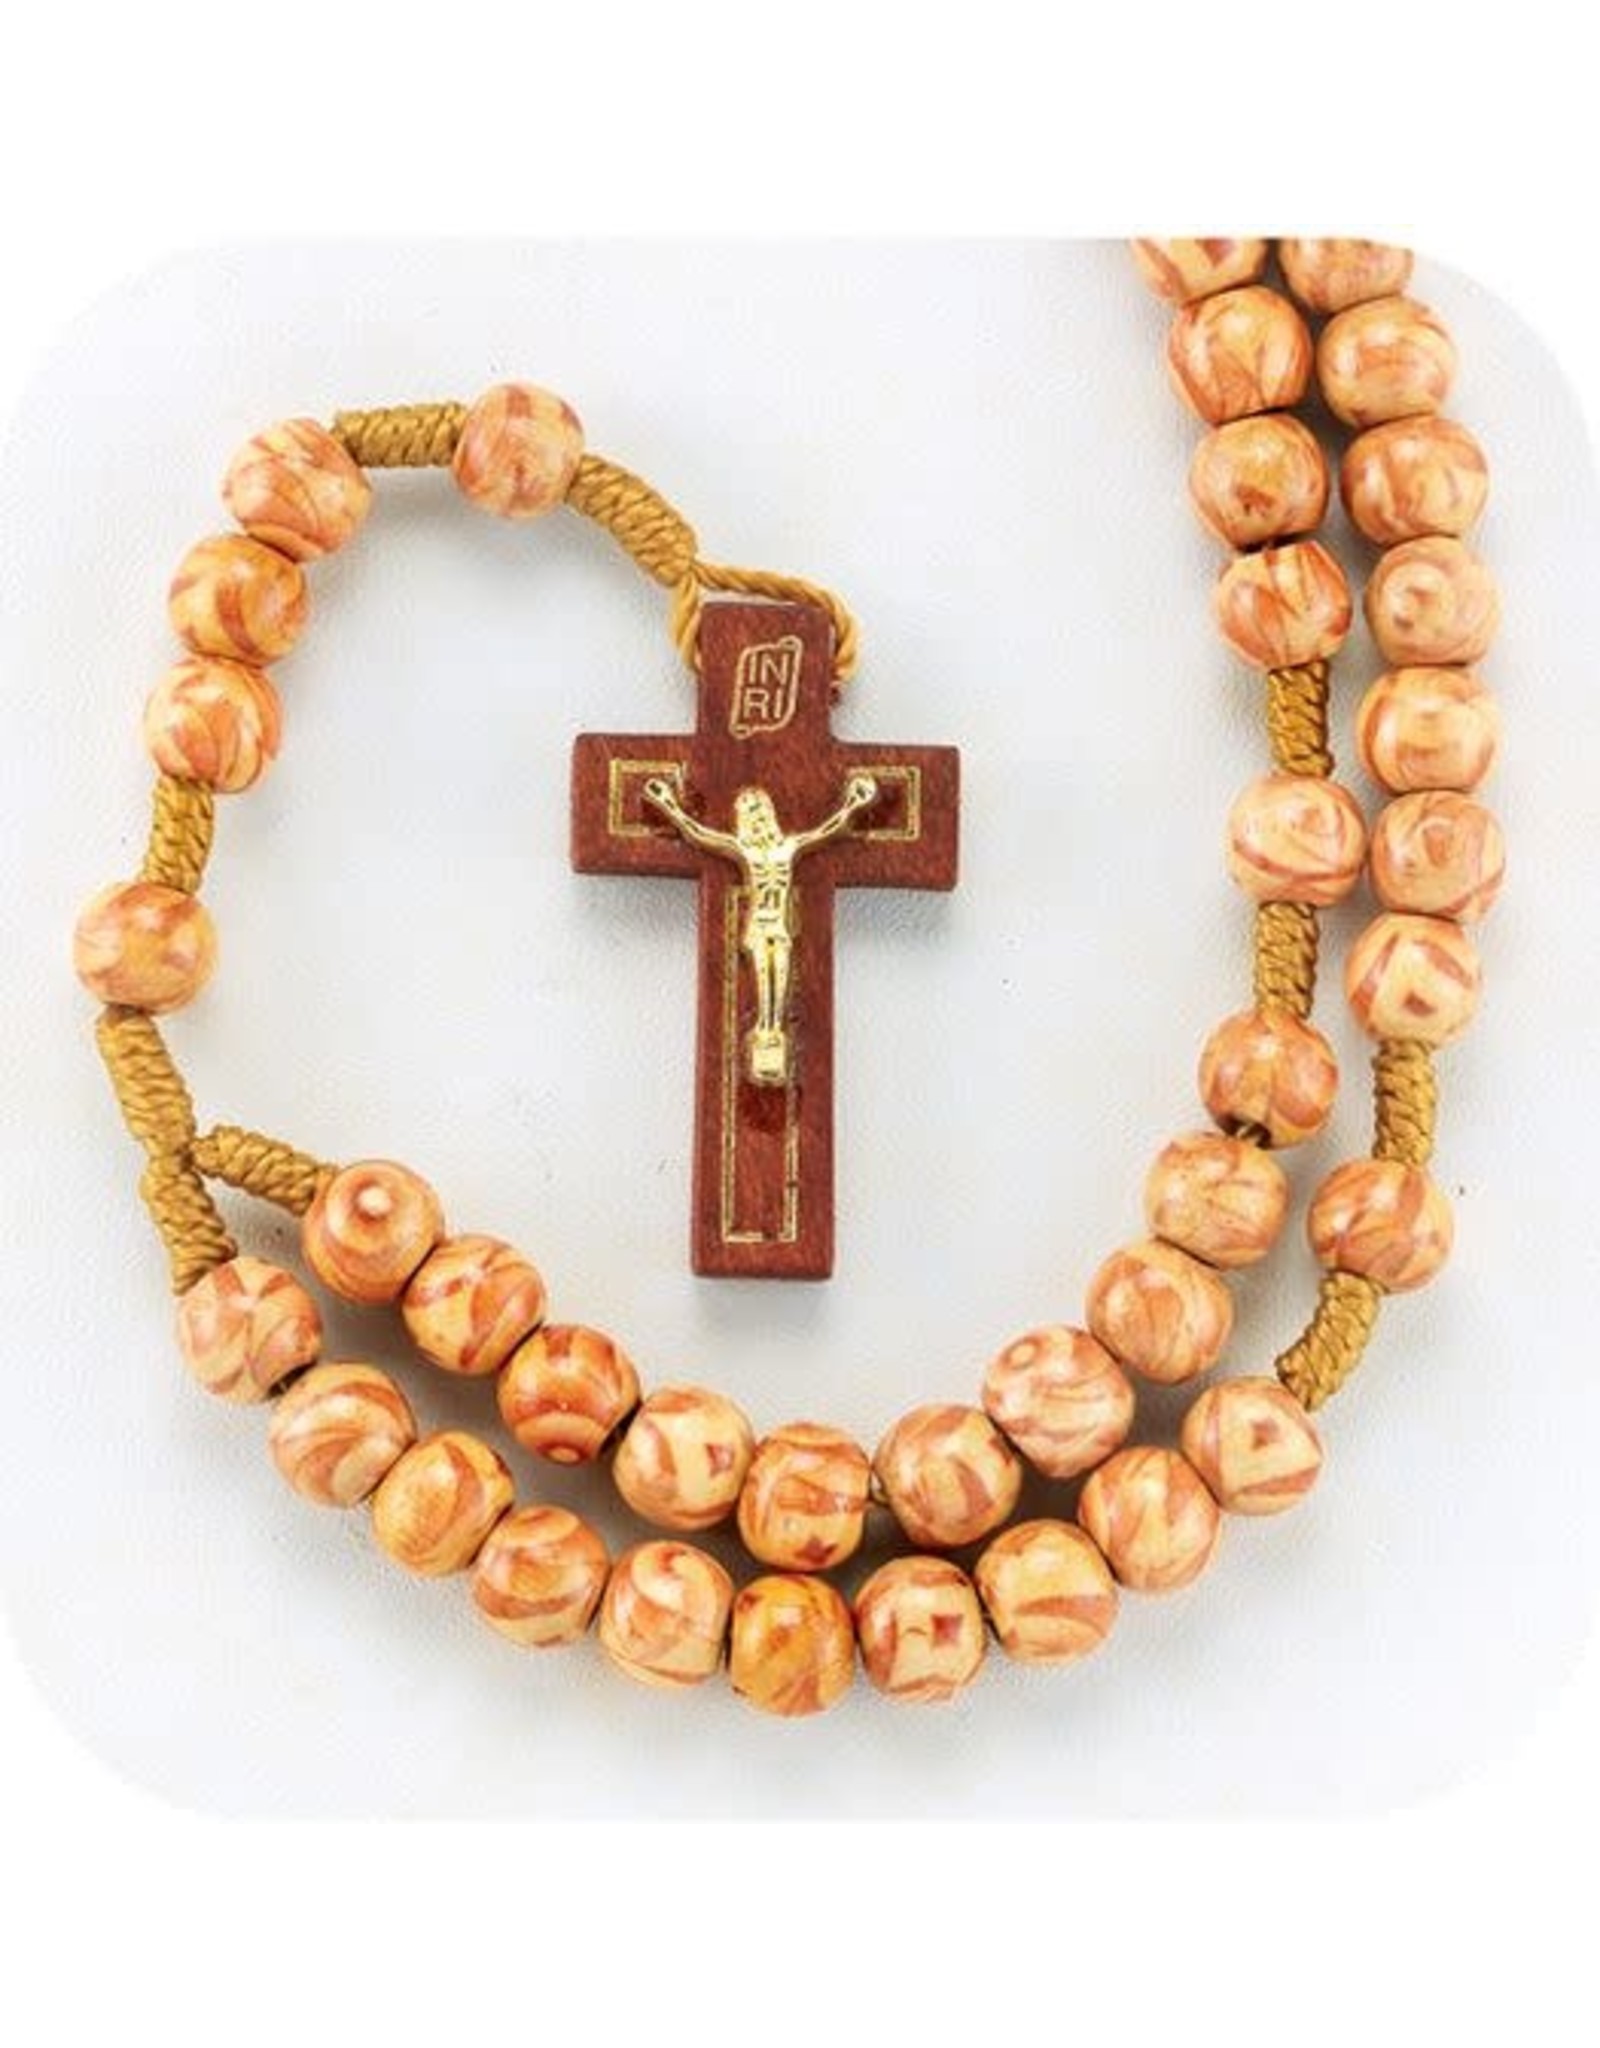 Rosary - Marbleized Light Wood Beads on Cord